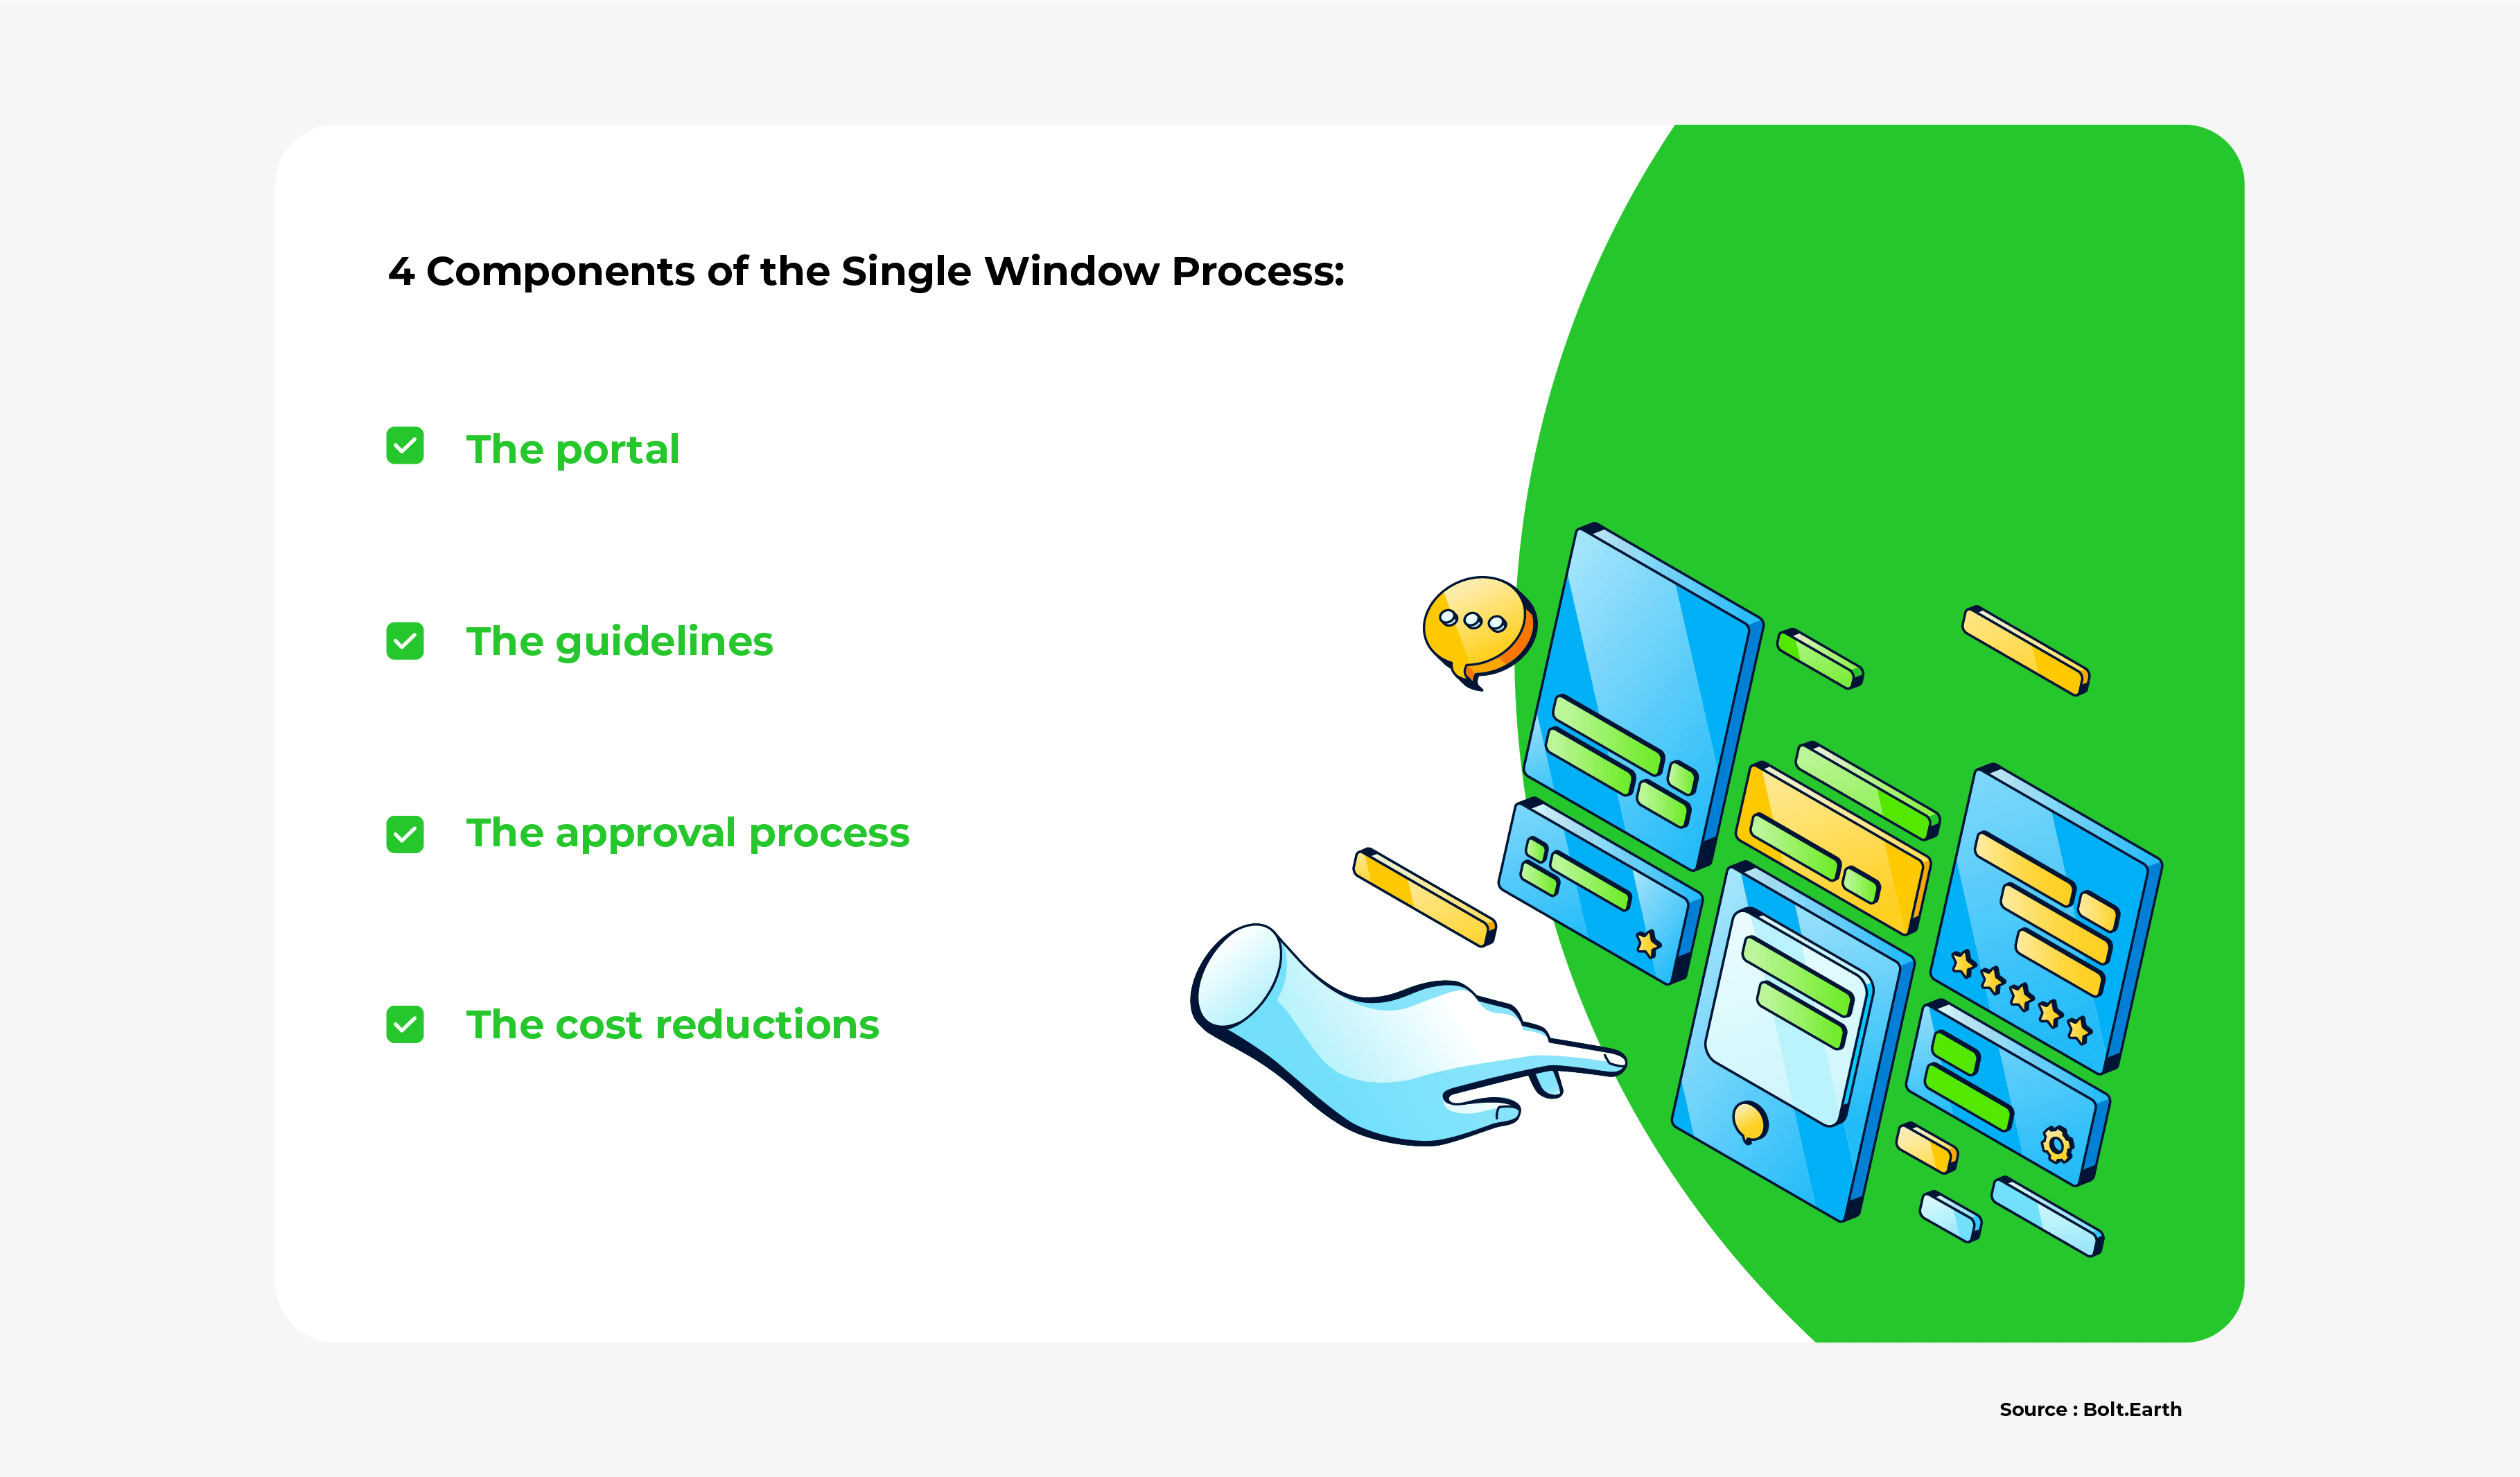 Image of the 4 components in the single window process.